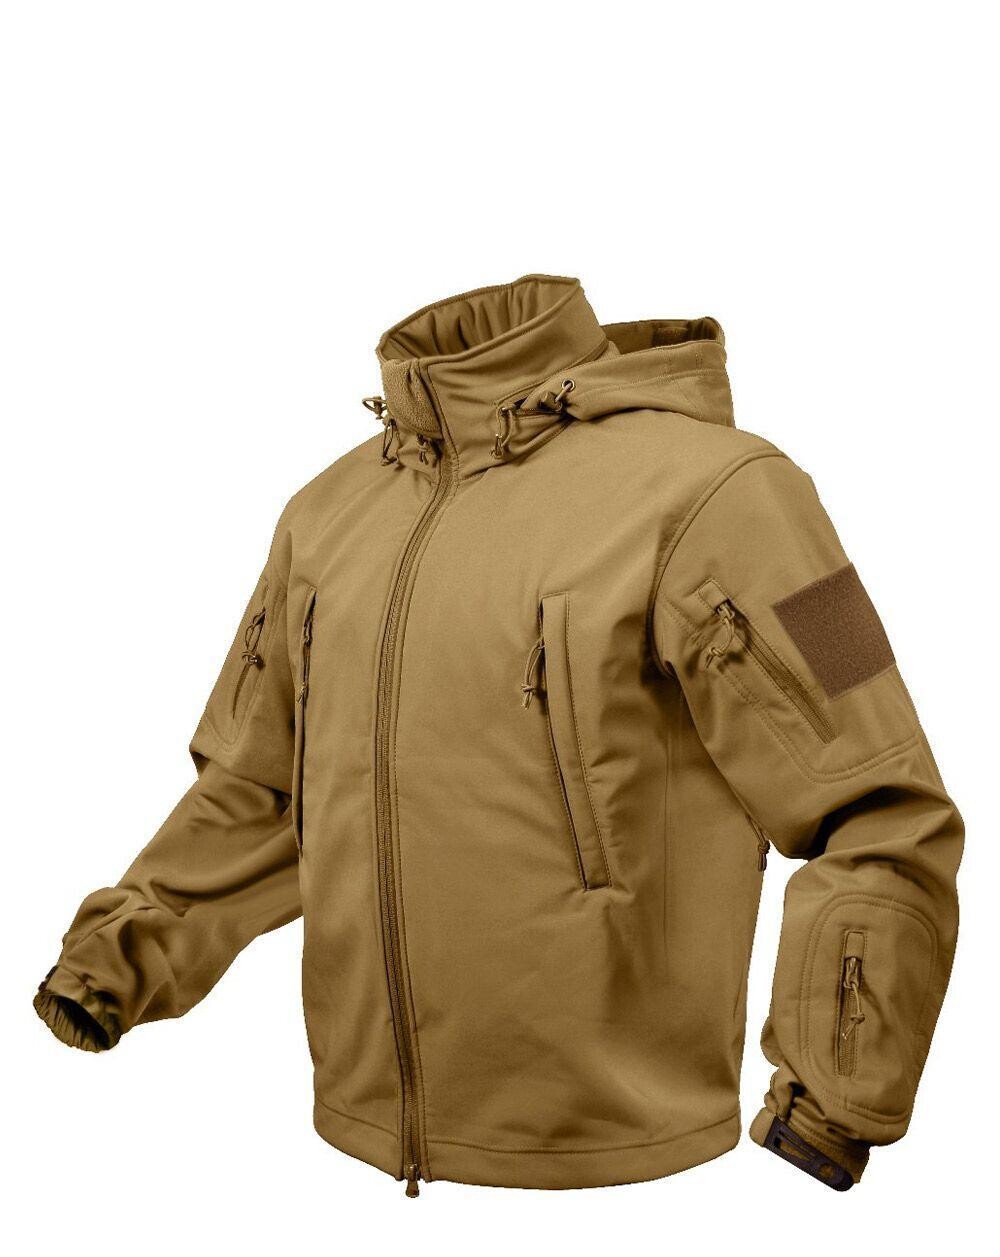 5: Rothco Special Ops Softshell Jakke (Coyote Brun, XS)